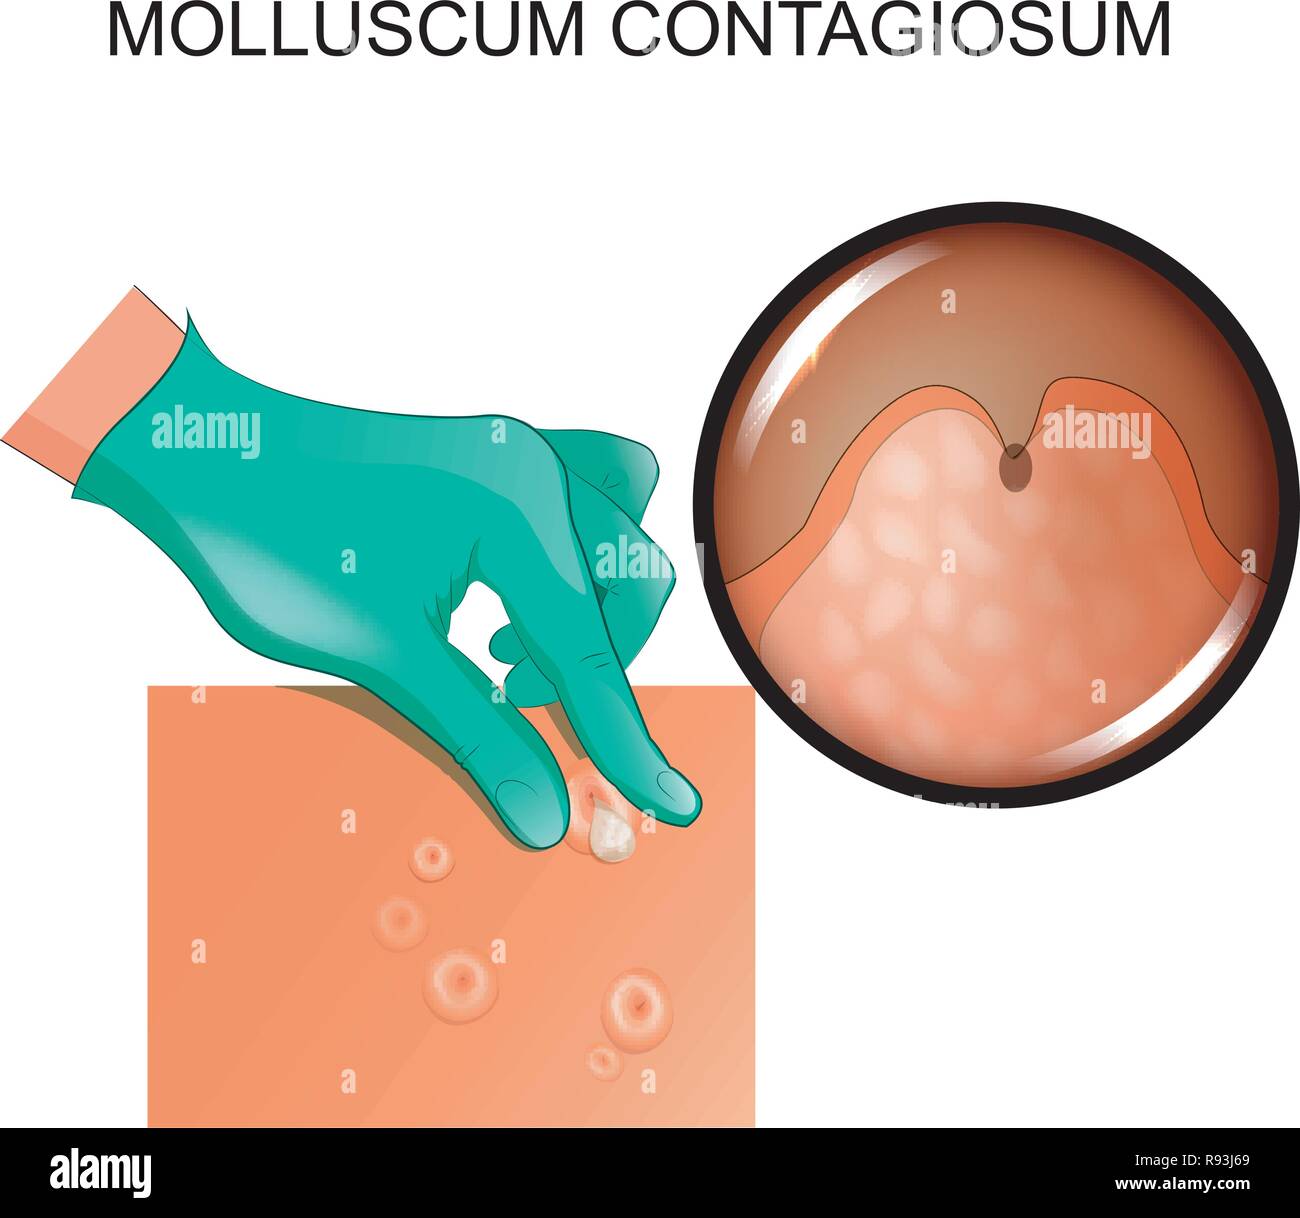 vector illustration of molluscum contagiosum. infection of the skin Stock Vector